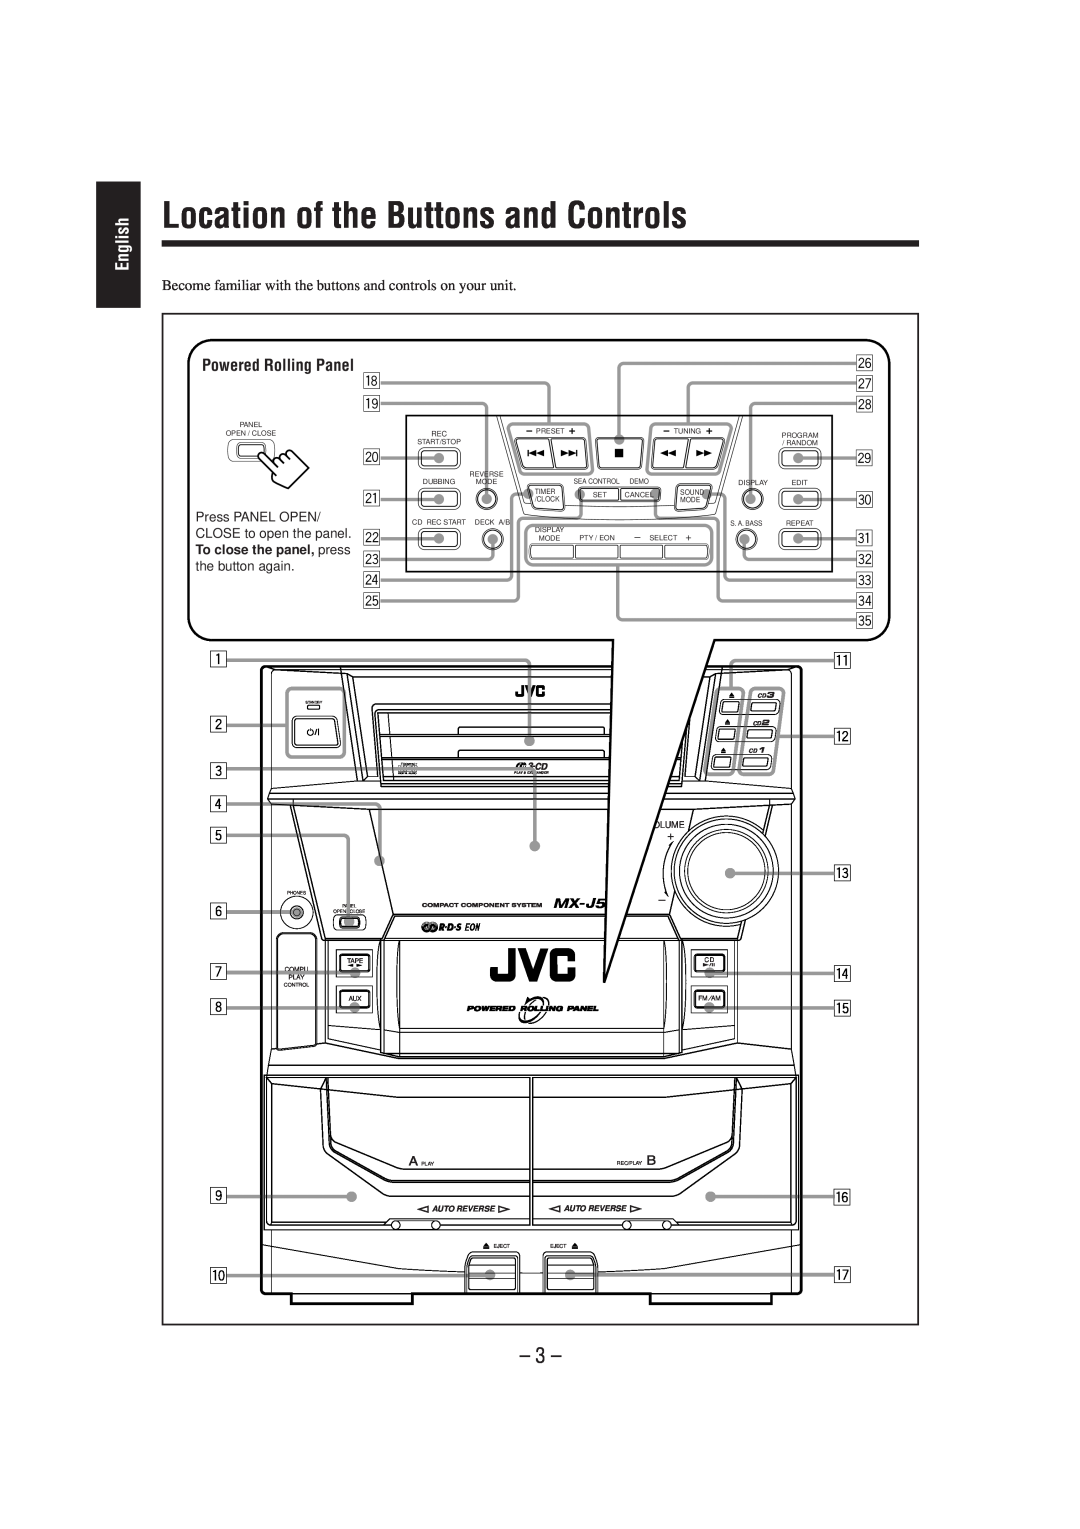 JVC CA-MXJ530R, CA-MXJ55R manual Location of the Buttons and Controls, English 